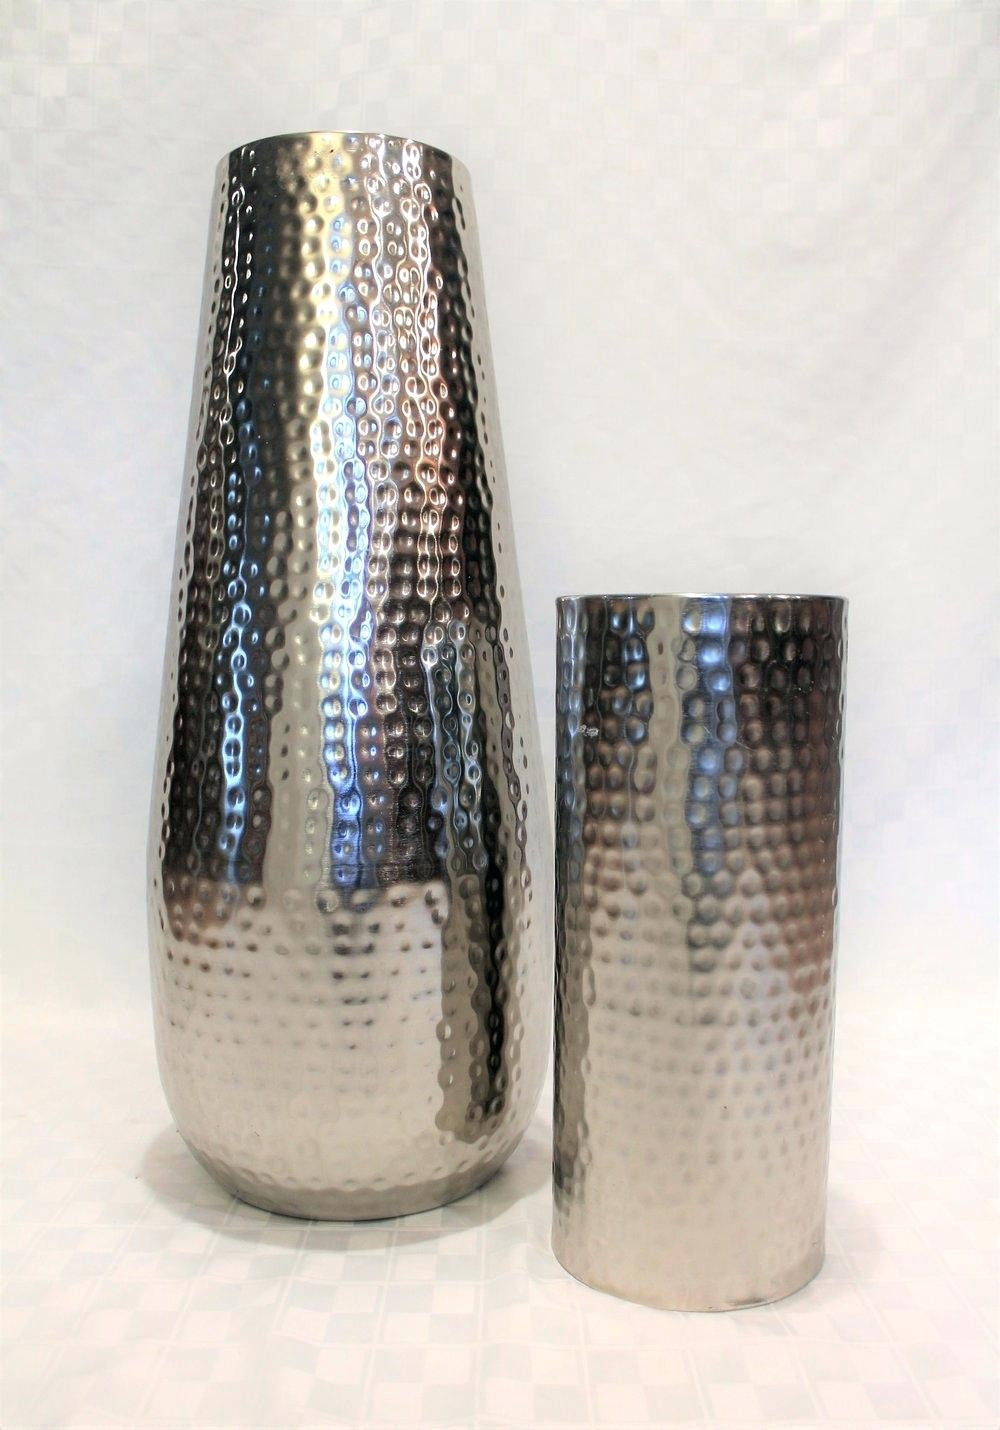 24 Unique Large Silver Vases Urns 2024 free download large silver vases urns of silver vases wholesale pandoraocharms us throughout silver vases wholesale glass bulk tall flower fl org